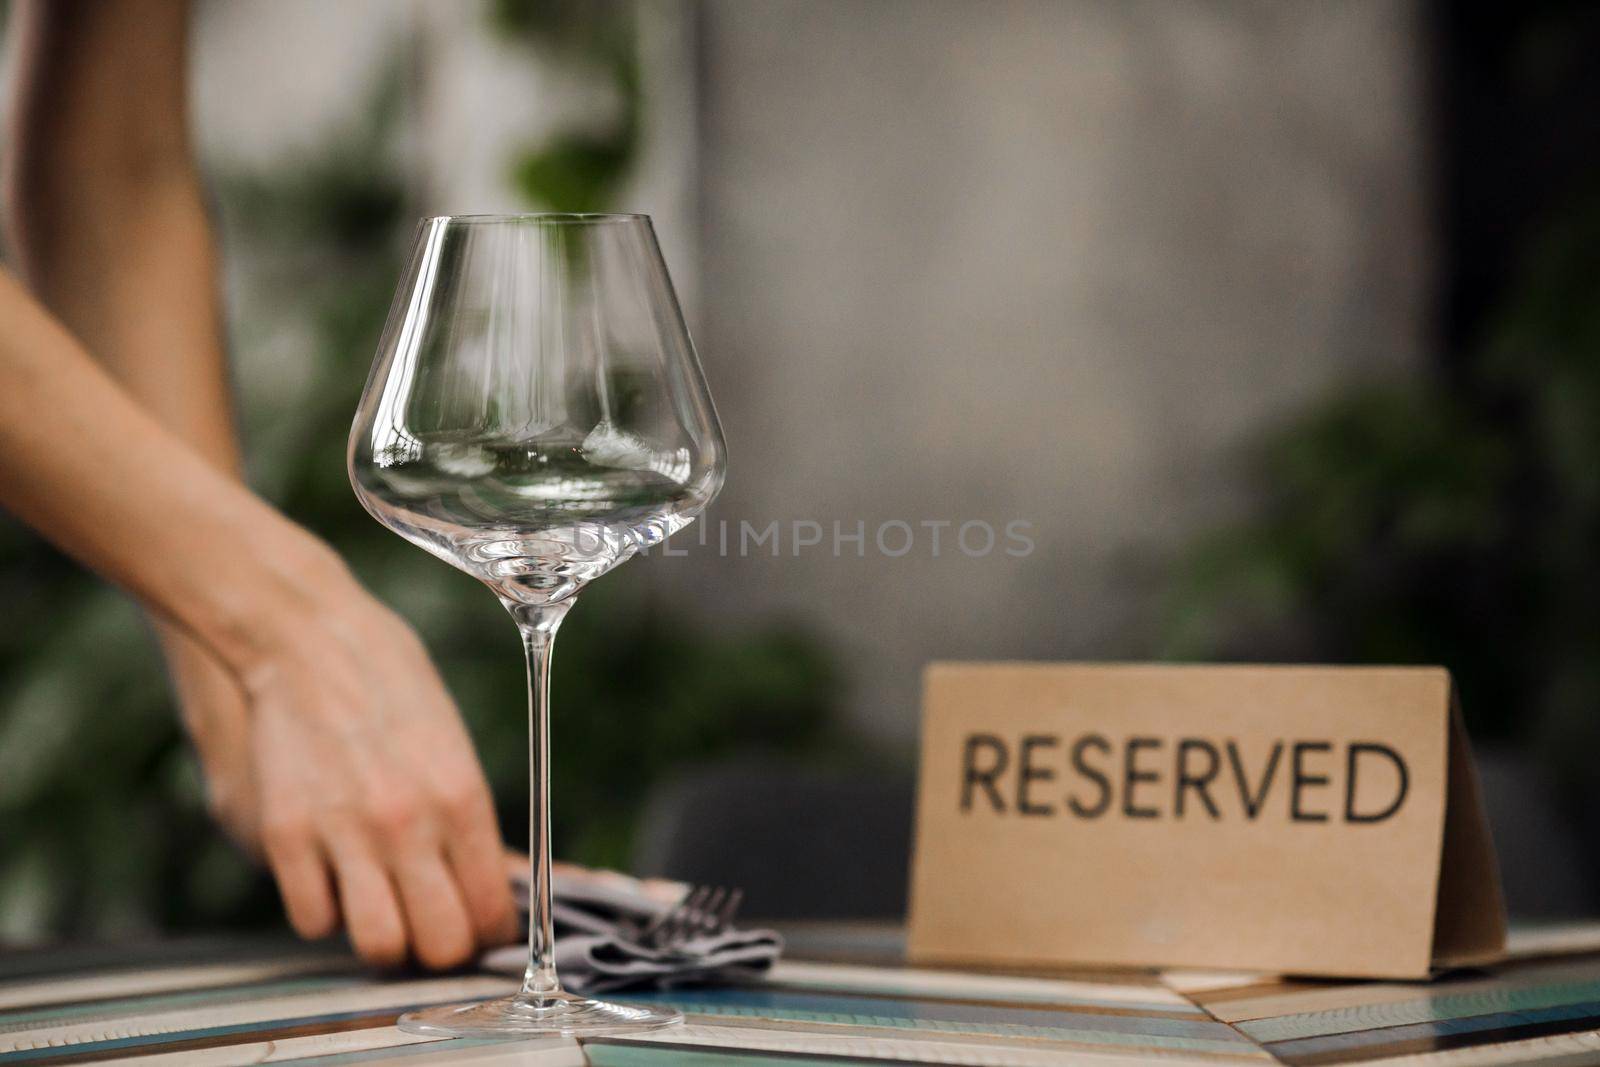 Hands serving reserved table by Demkat